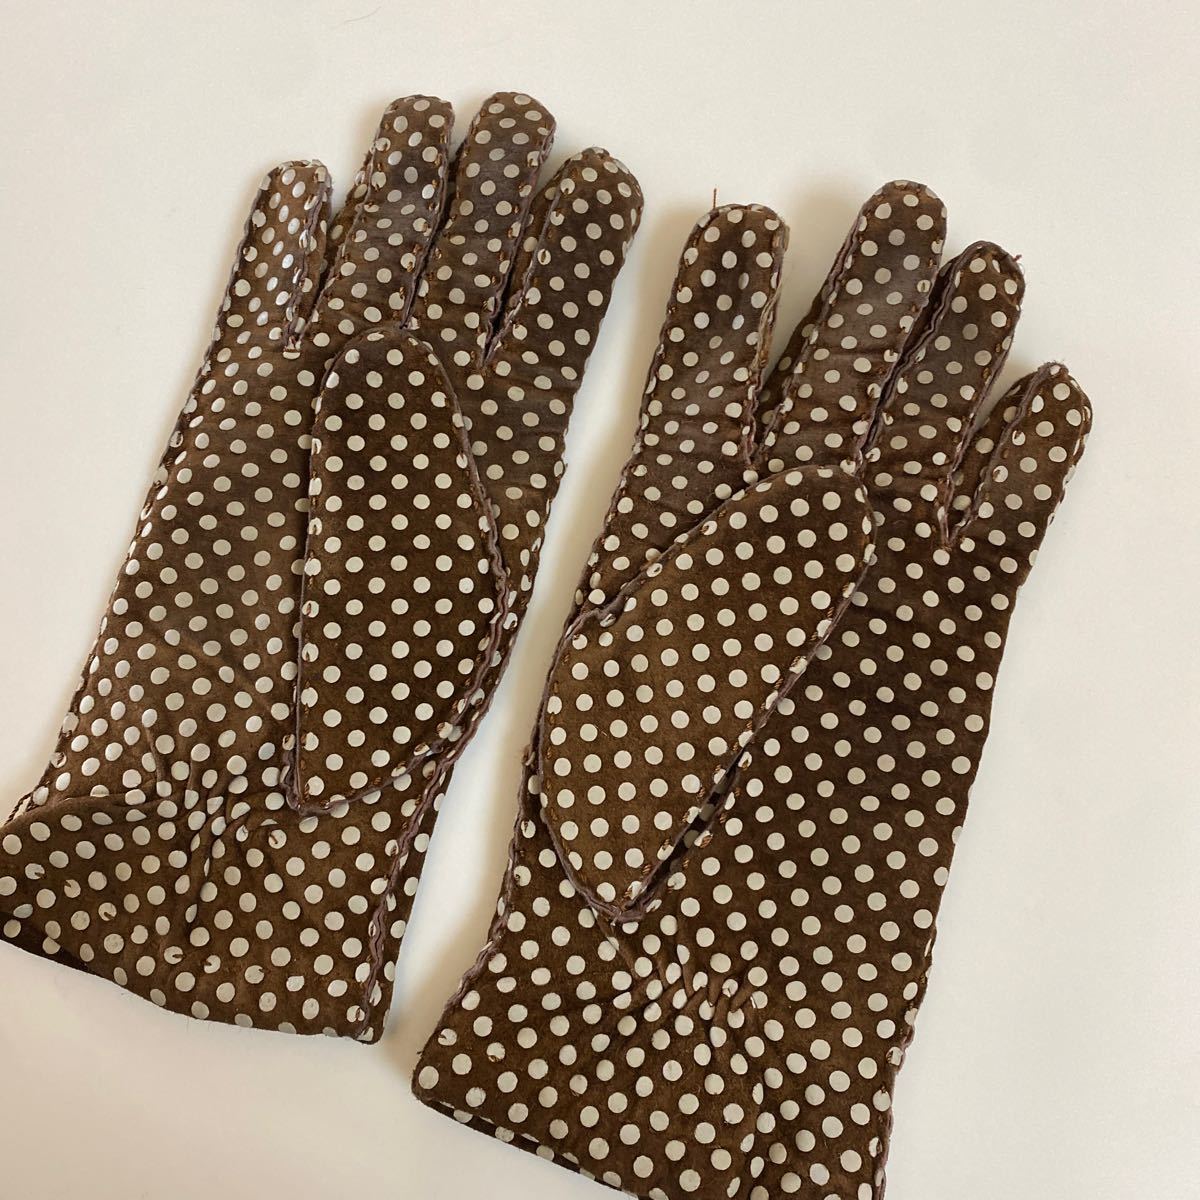  sale prompt decision 1 jpy cache*nezkashune dot pattern blow b gloves polka dot Brown lady's suede used 